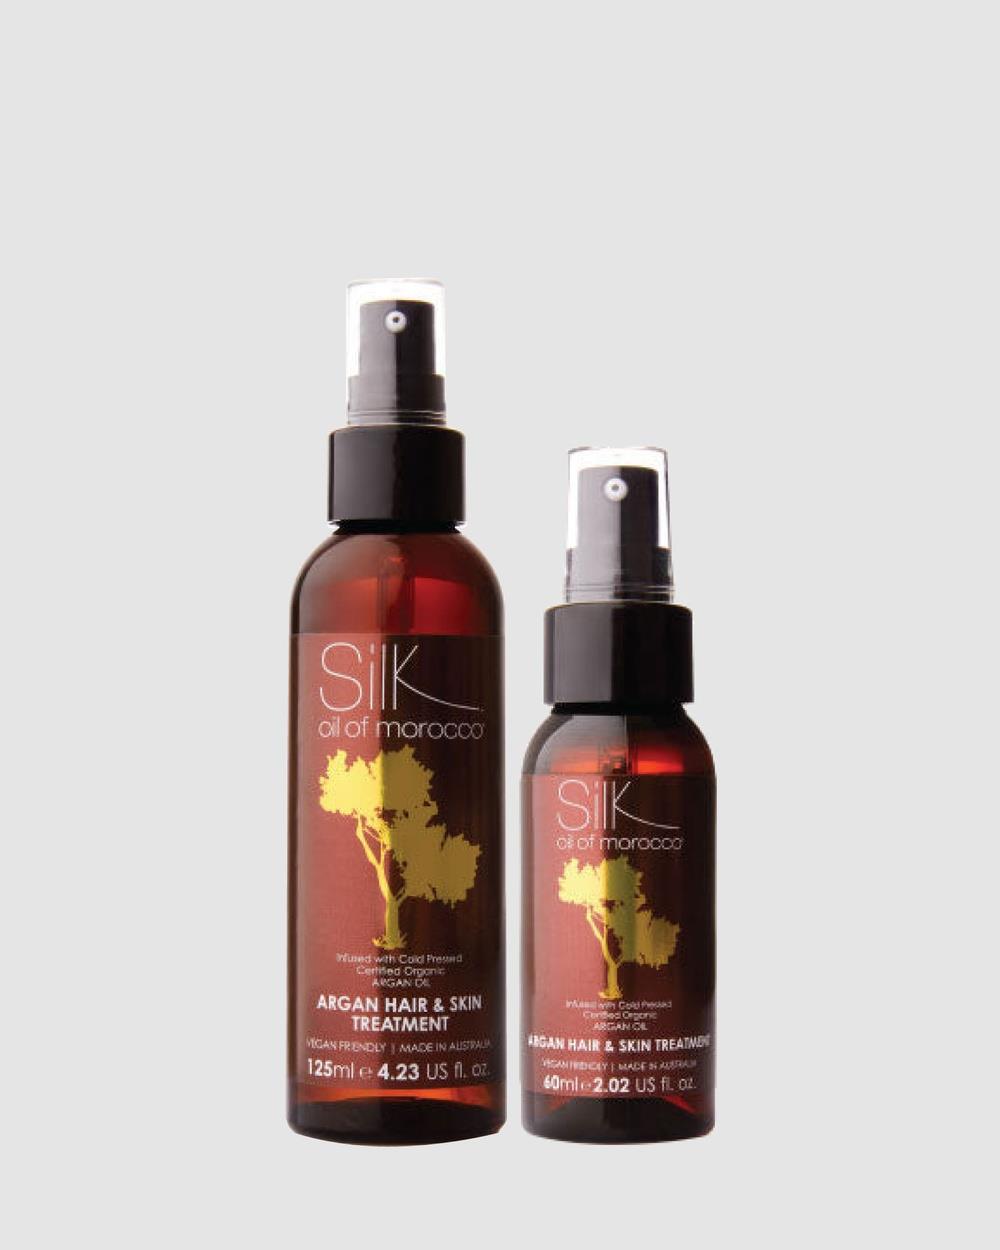 Silk Oil of Morocco - Home & Away Serum Collection Value Pack - Hair (Gold) Home & Away Serum Collection - Value Pack